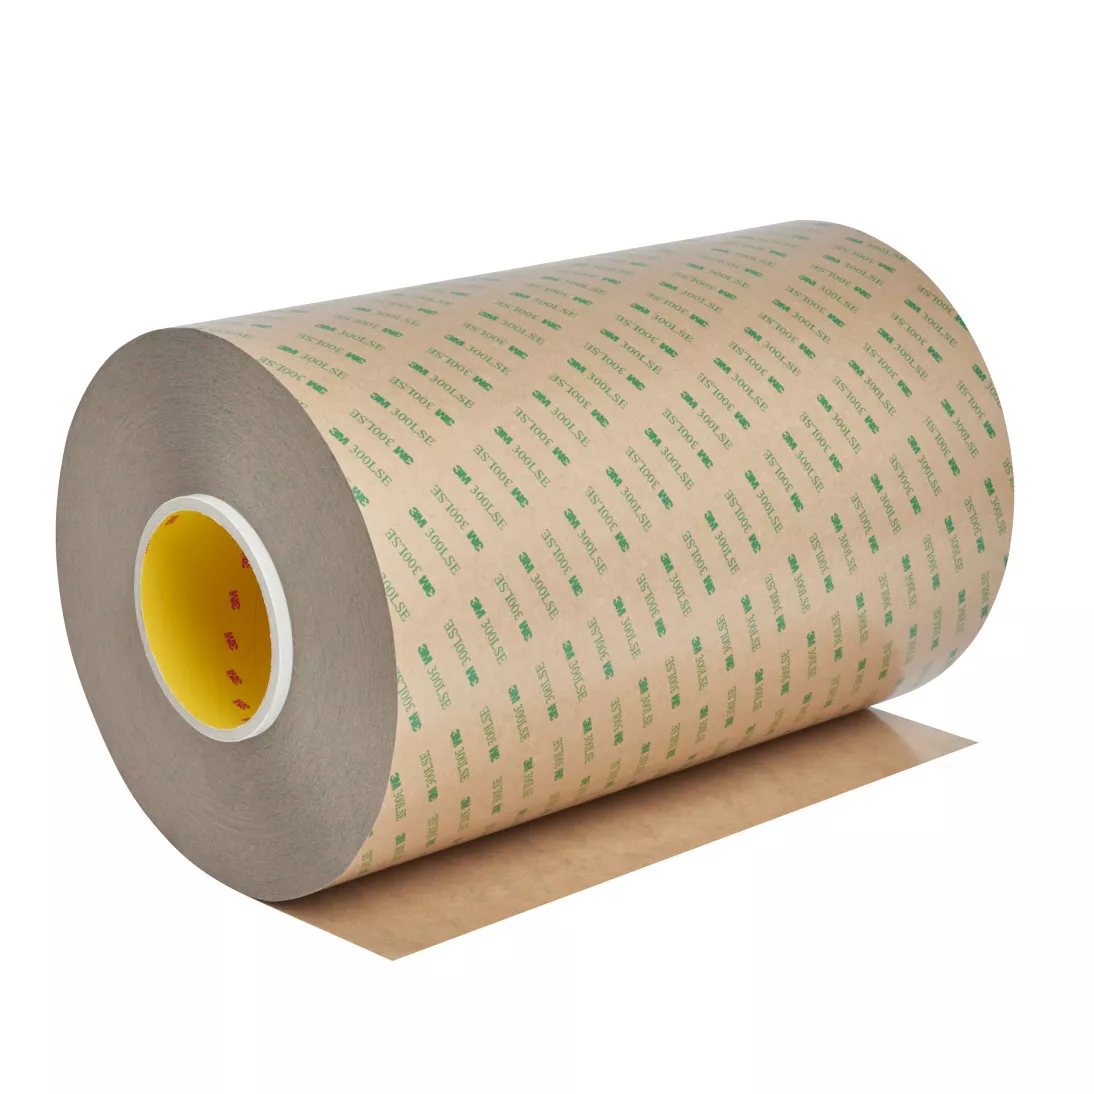 3M™ Adhesive Transfer Tape 9472LE, Clear, 1 in x 60 yd, 5.2 mil, 9 rolls
per case